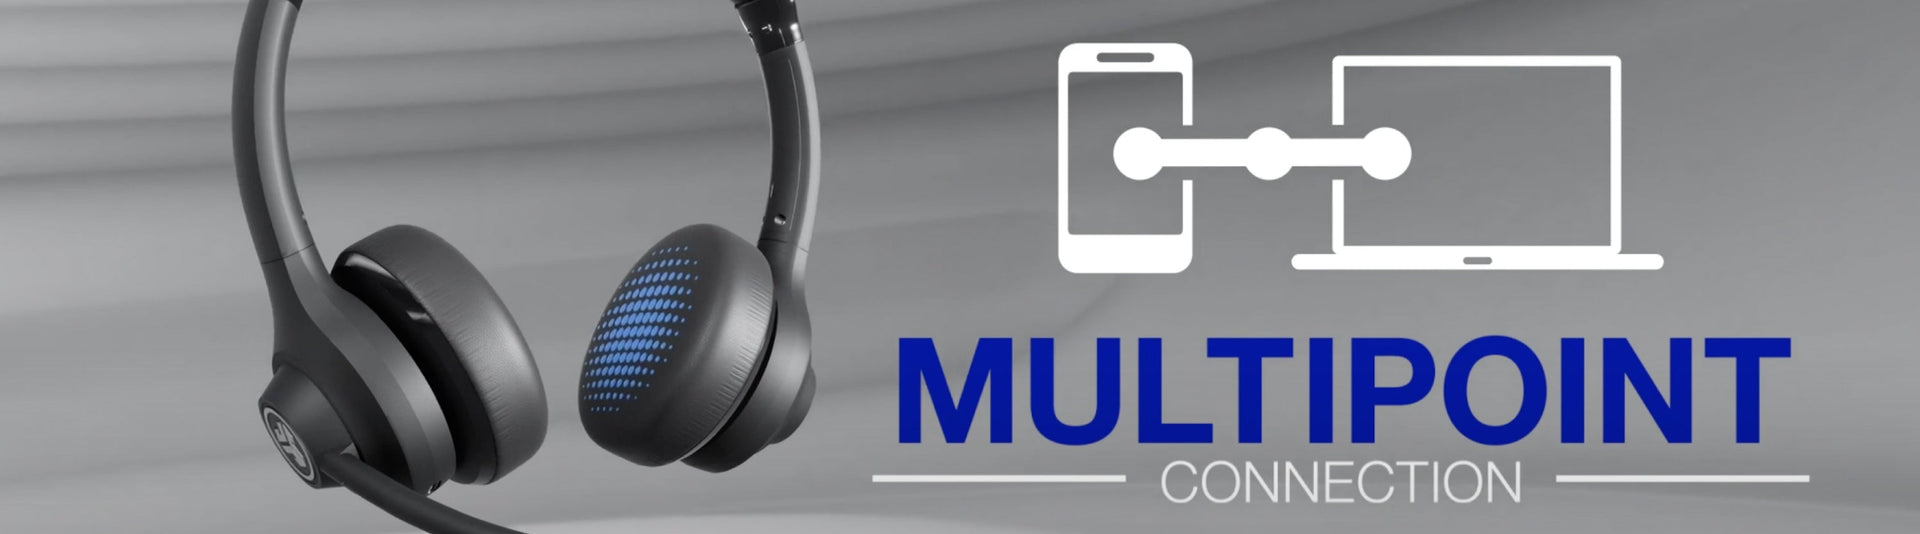 Designed for Life: Bluetooth Multipoint